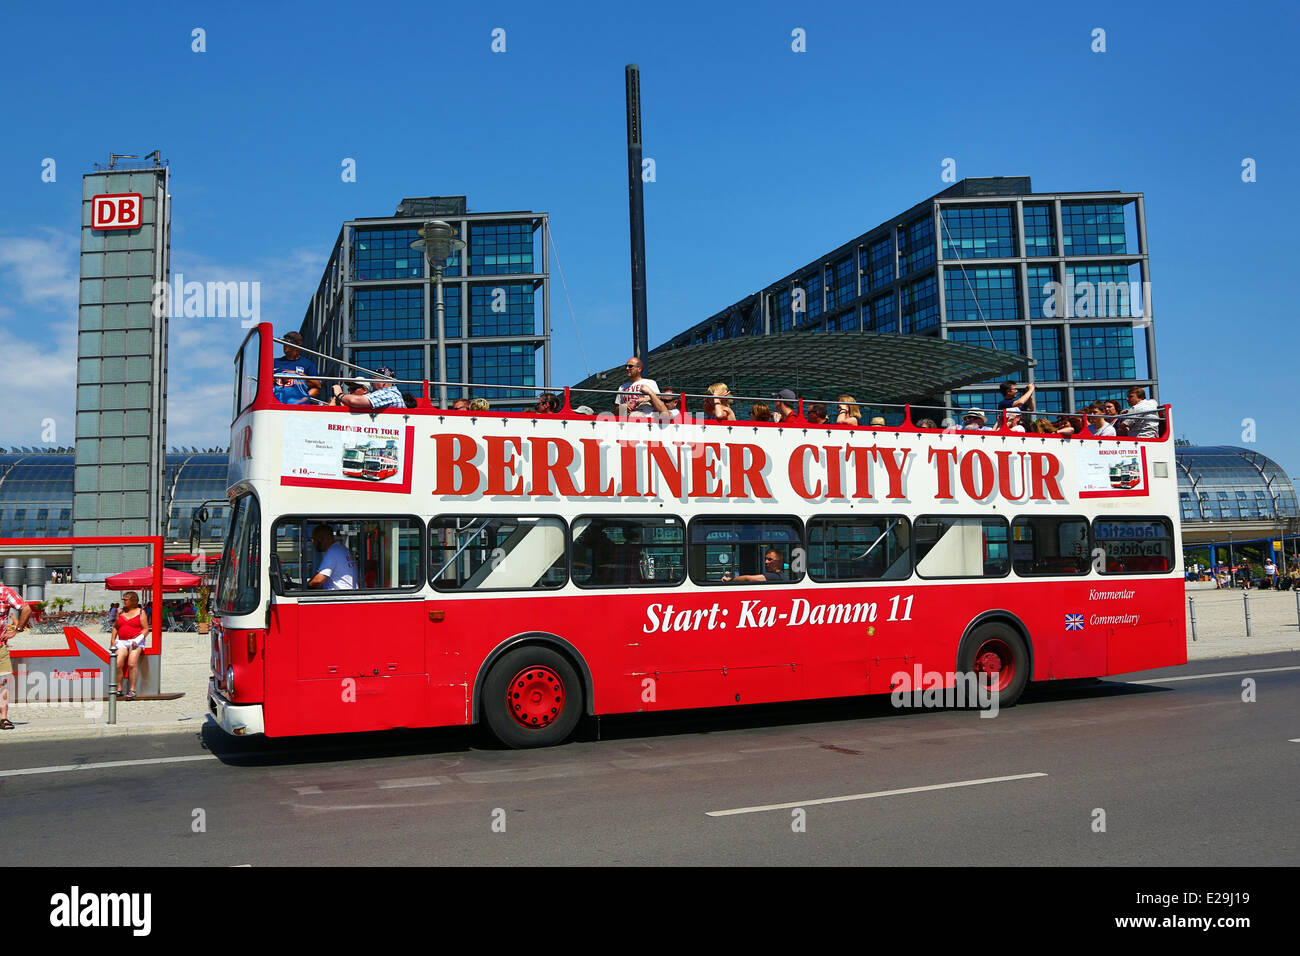 Berlin tourist sightseeing tour bus outside the Hauptbahnhof central  station in Berlin, Germany Stock Photo - Alamy